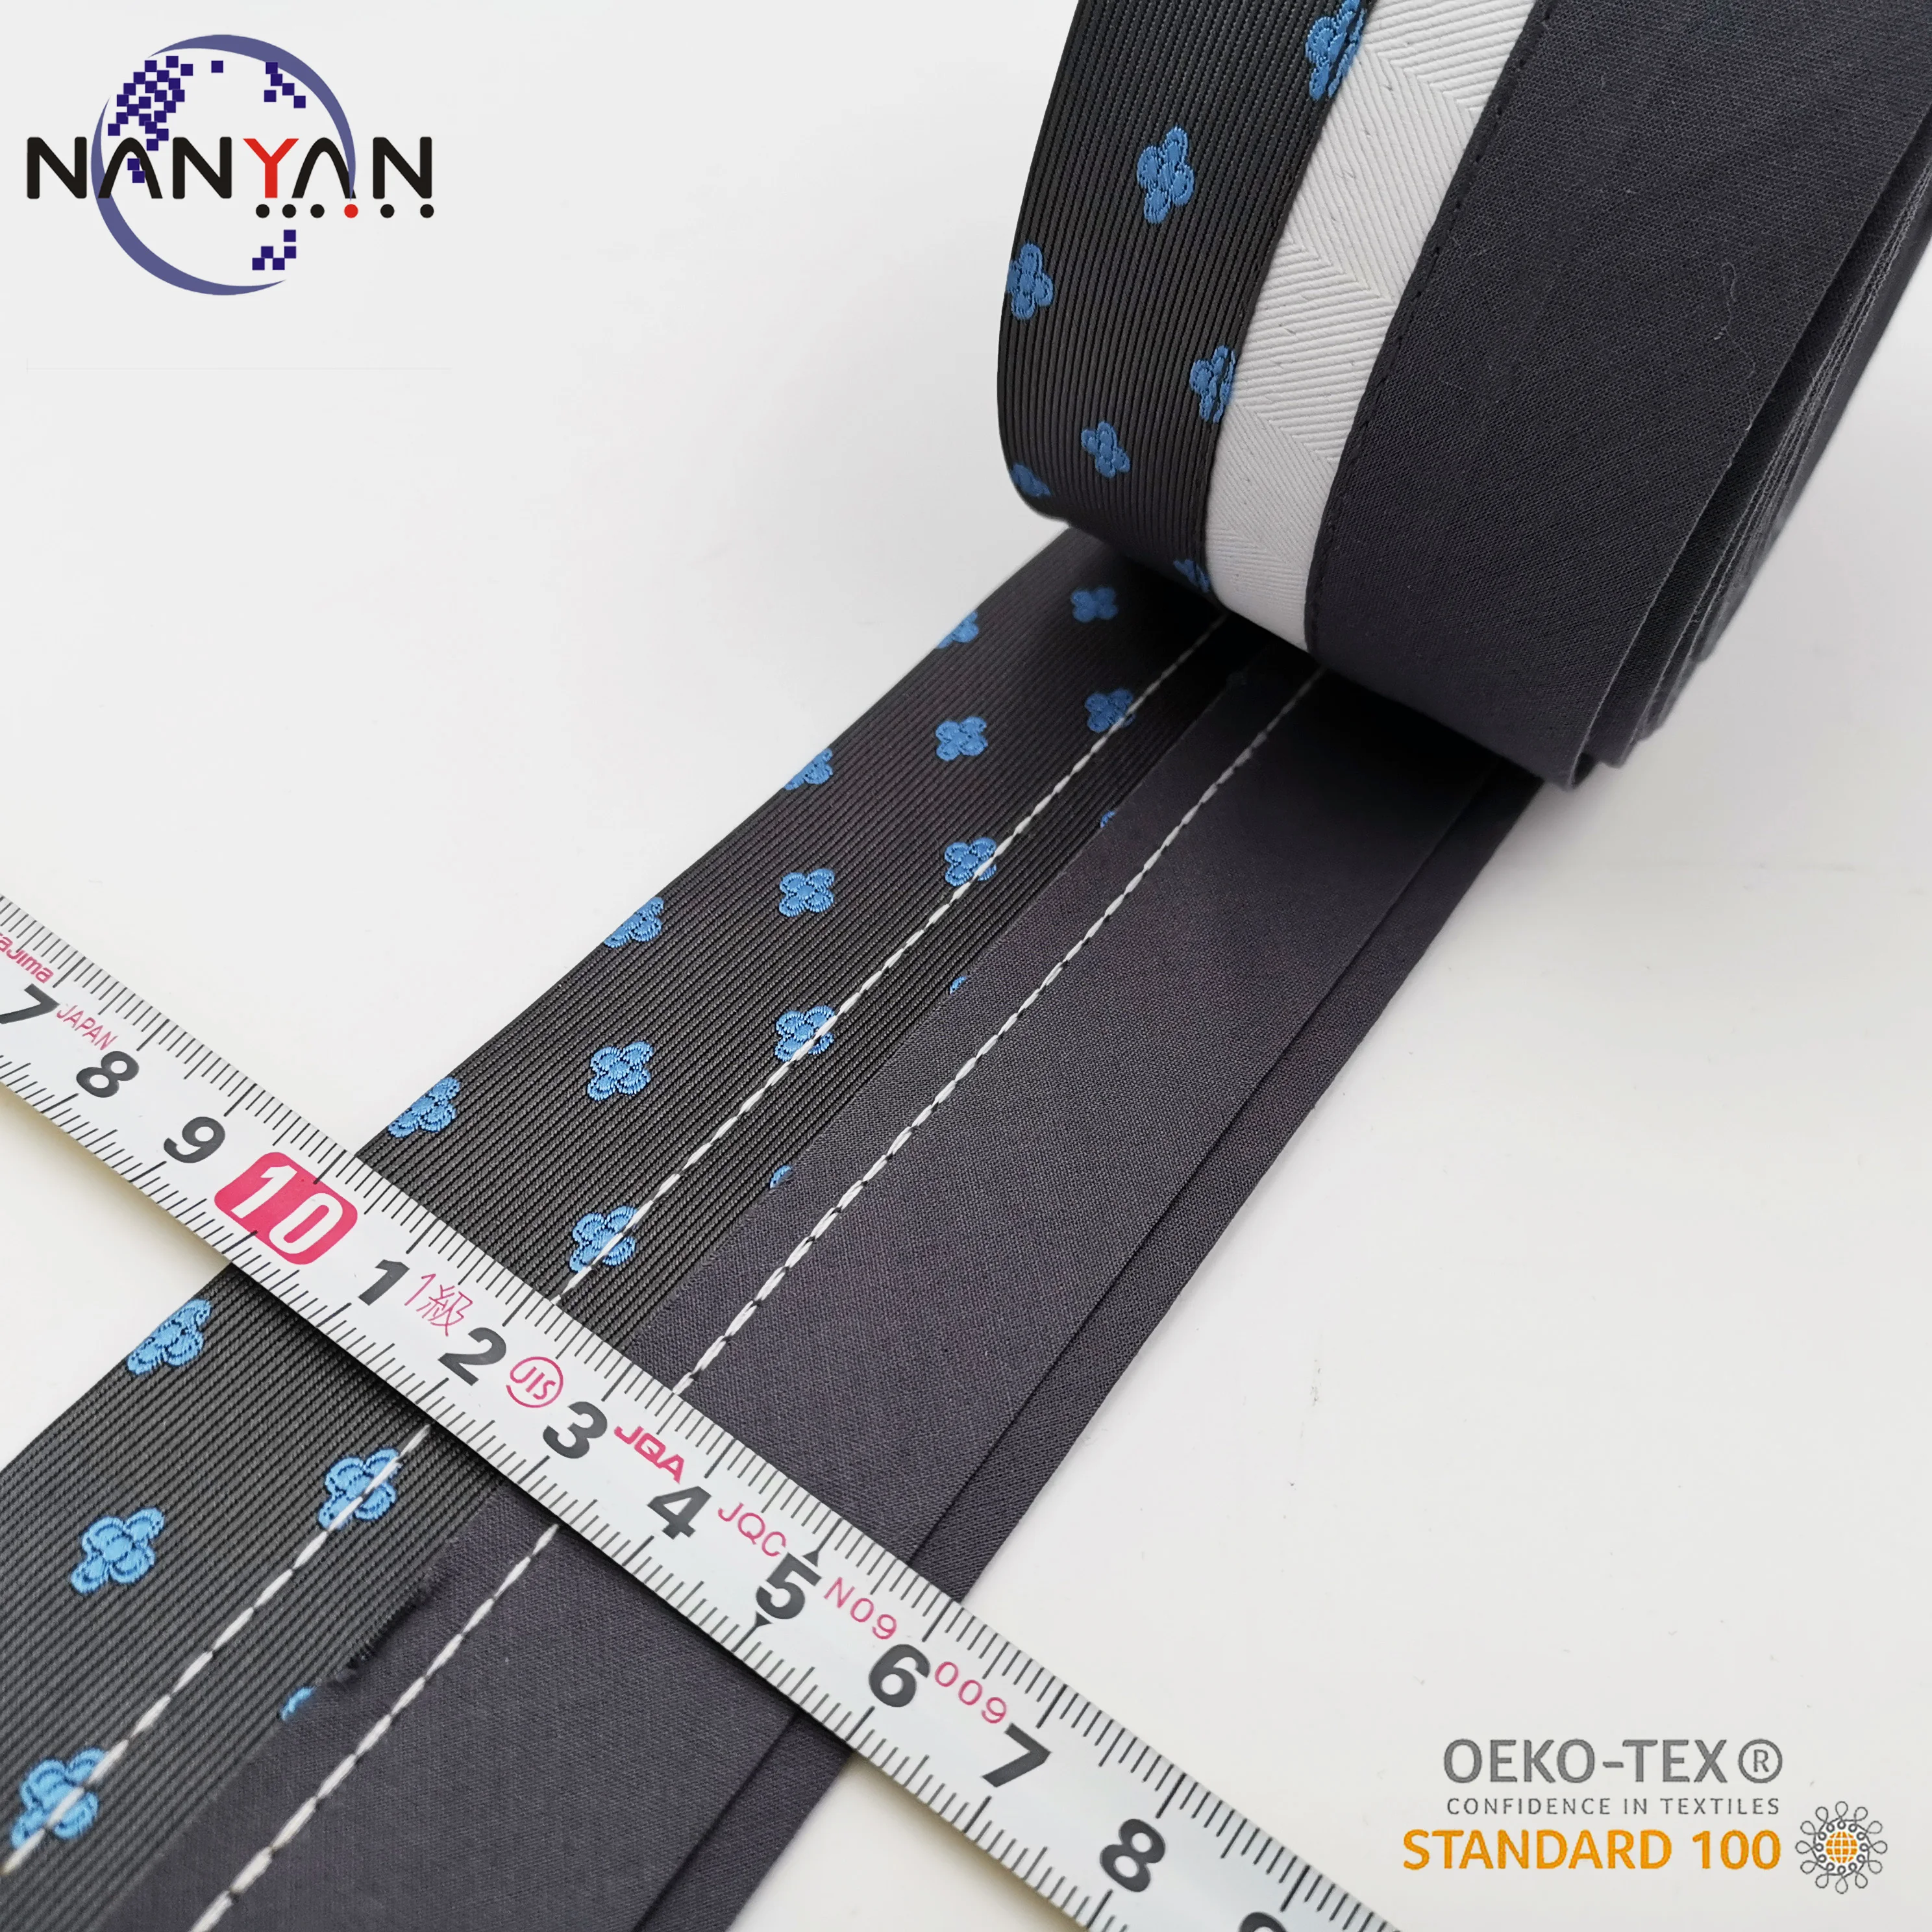 2 3/8" waistband with ribbon tailoring material for trousers